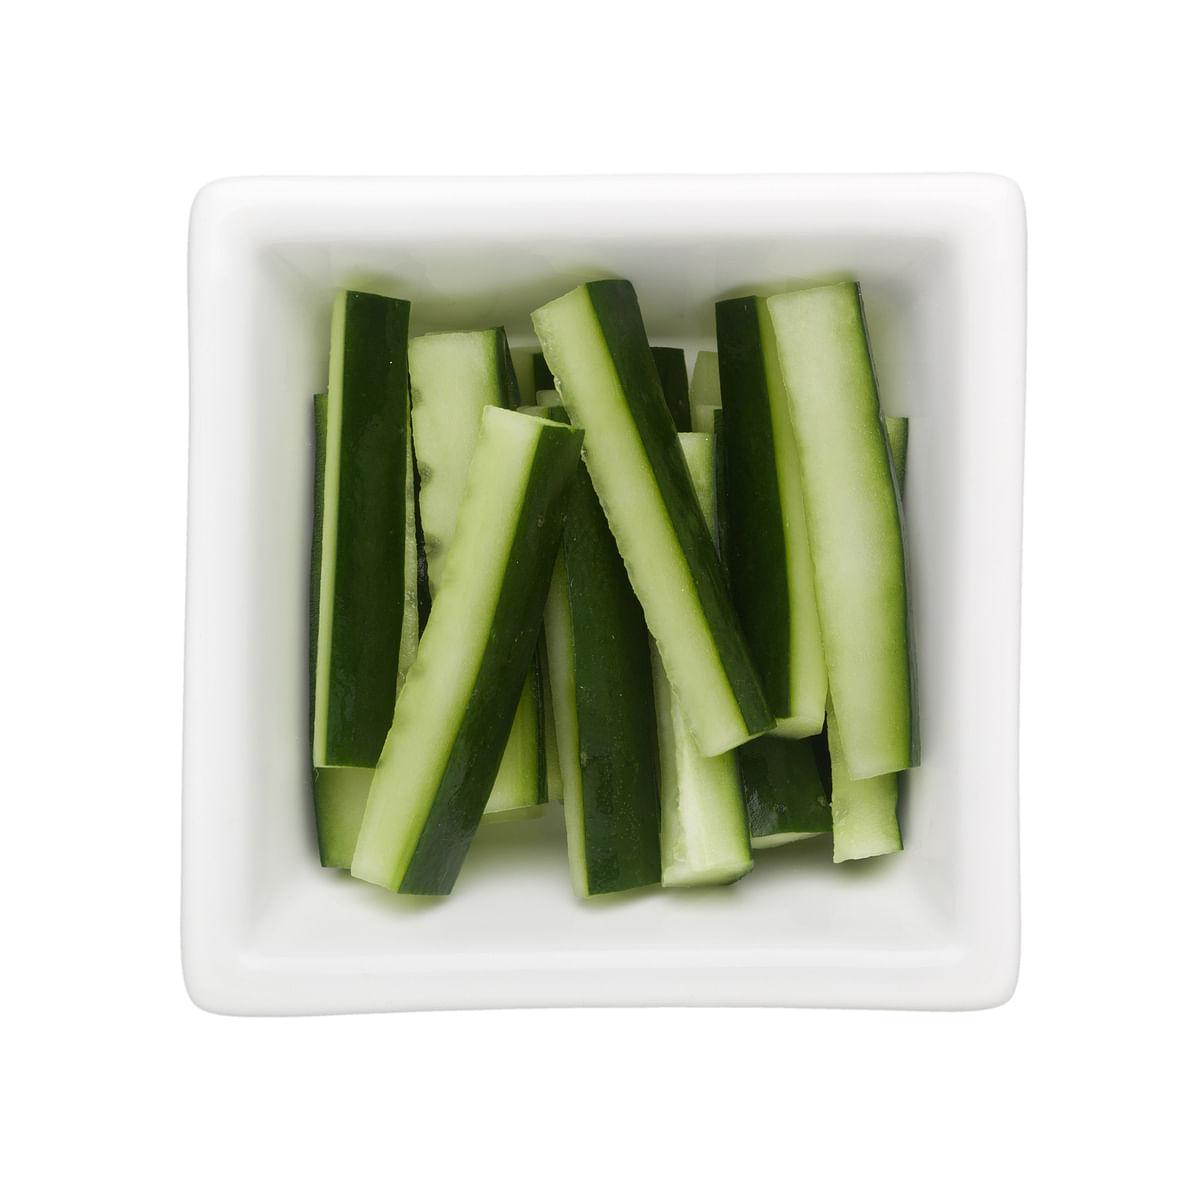 Healthy, Creative Cucumber Recipes to Try During COVID-19 Lockdown